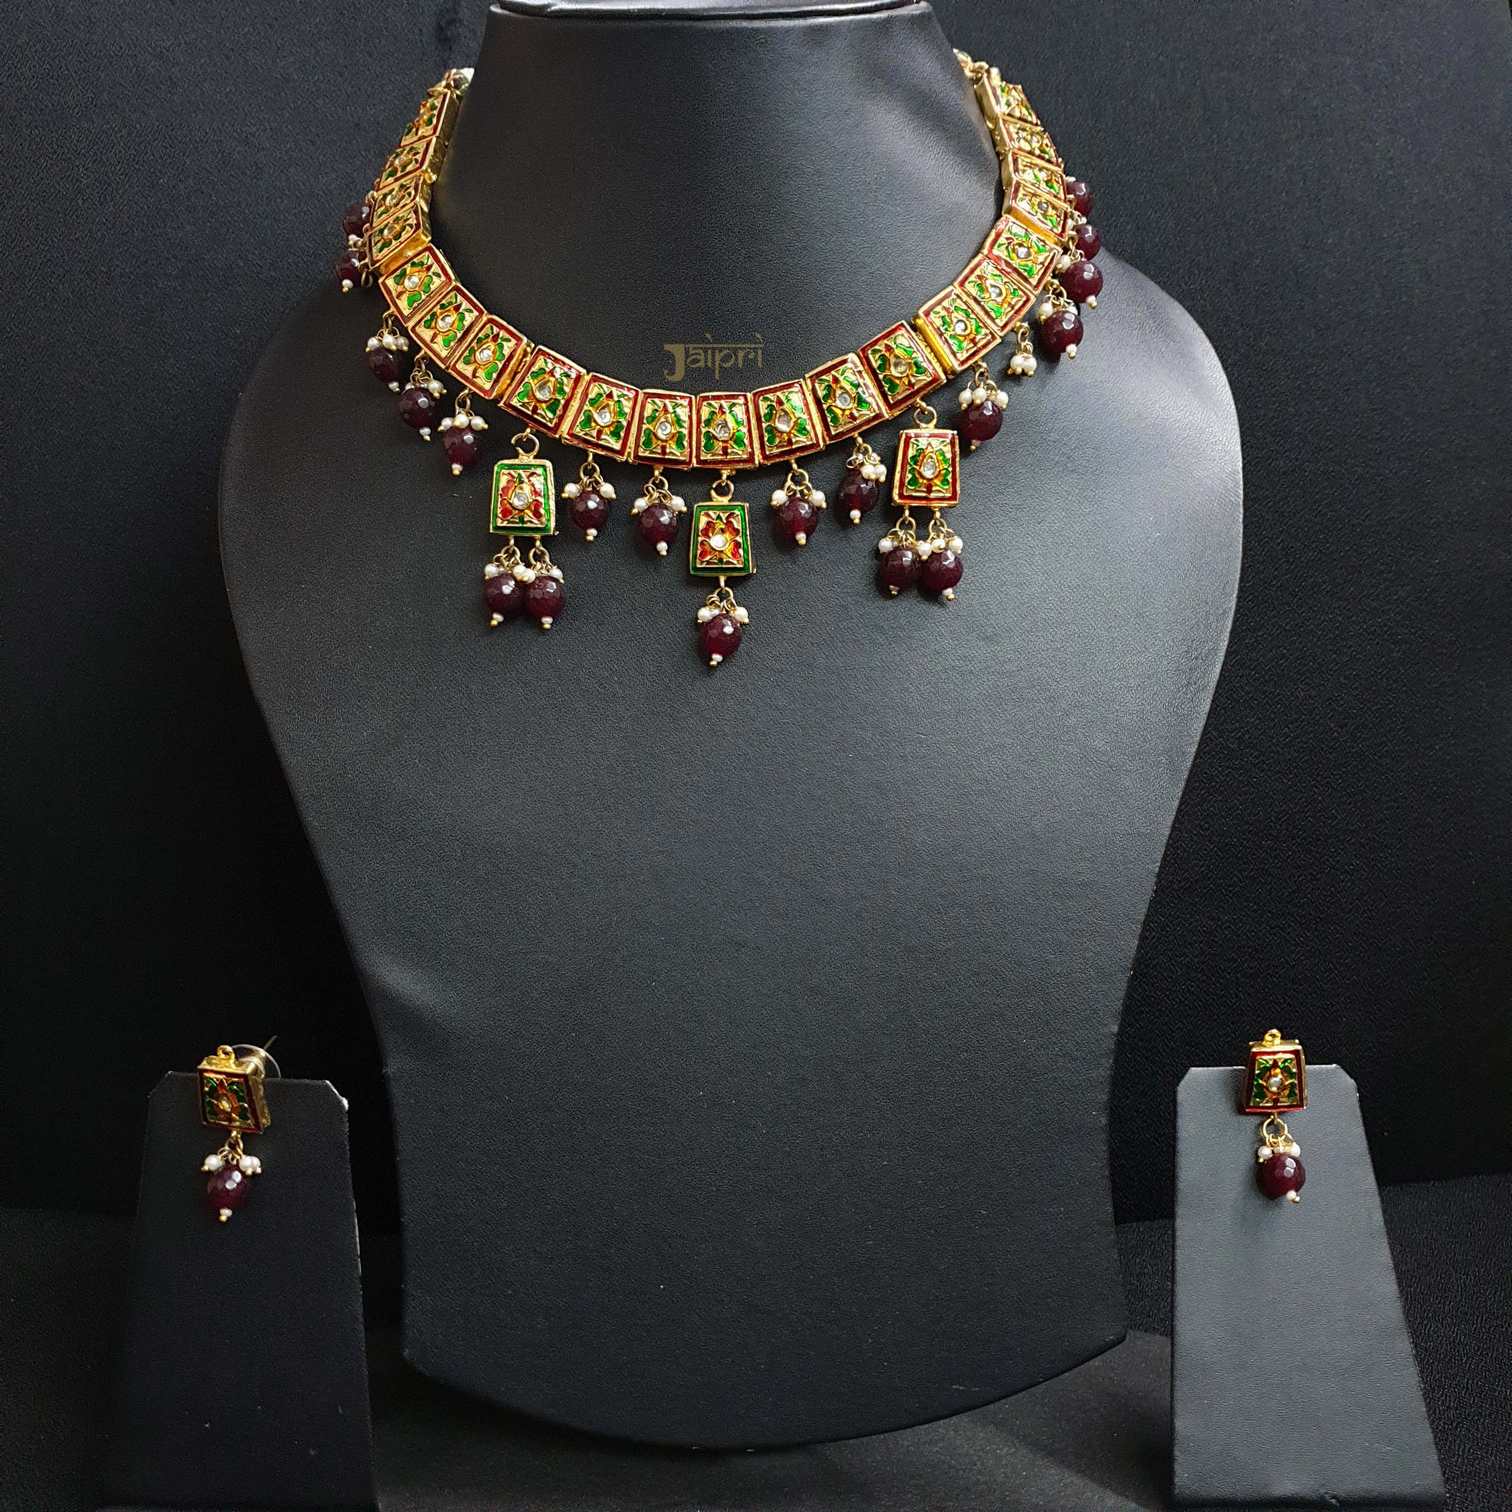 Green & Red Meenakari Thread Necklace With Earrings